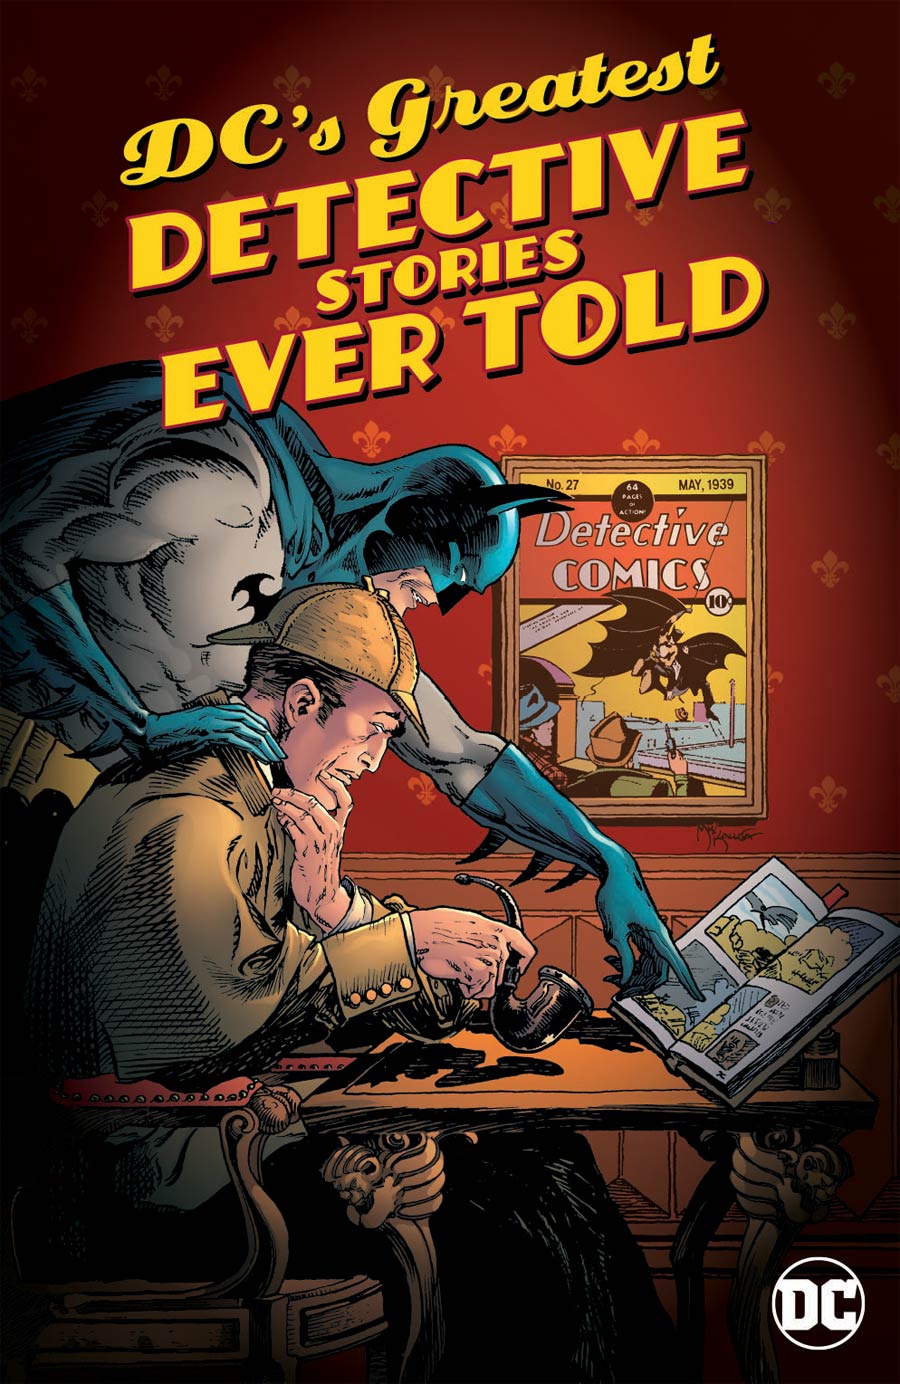 DCs Greatest Detective Stories Ever Told TP